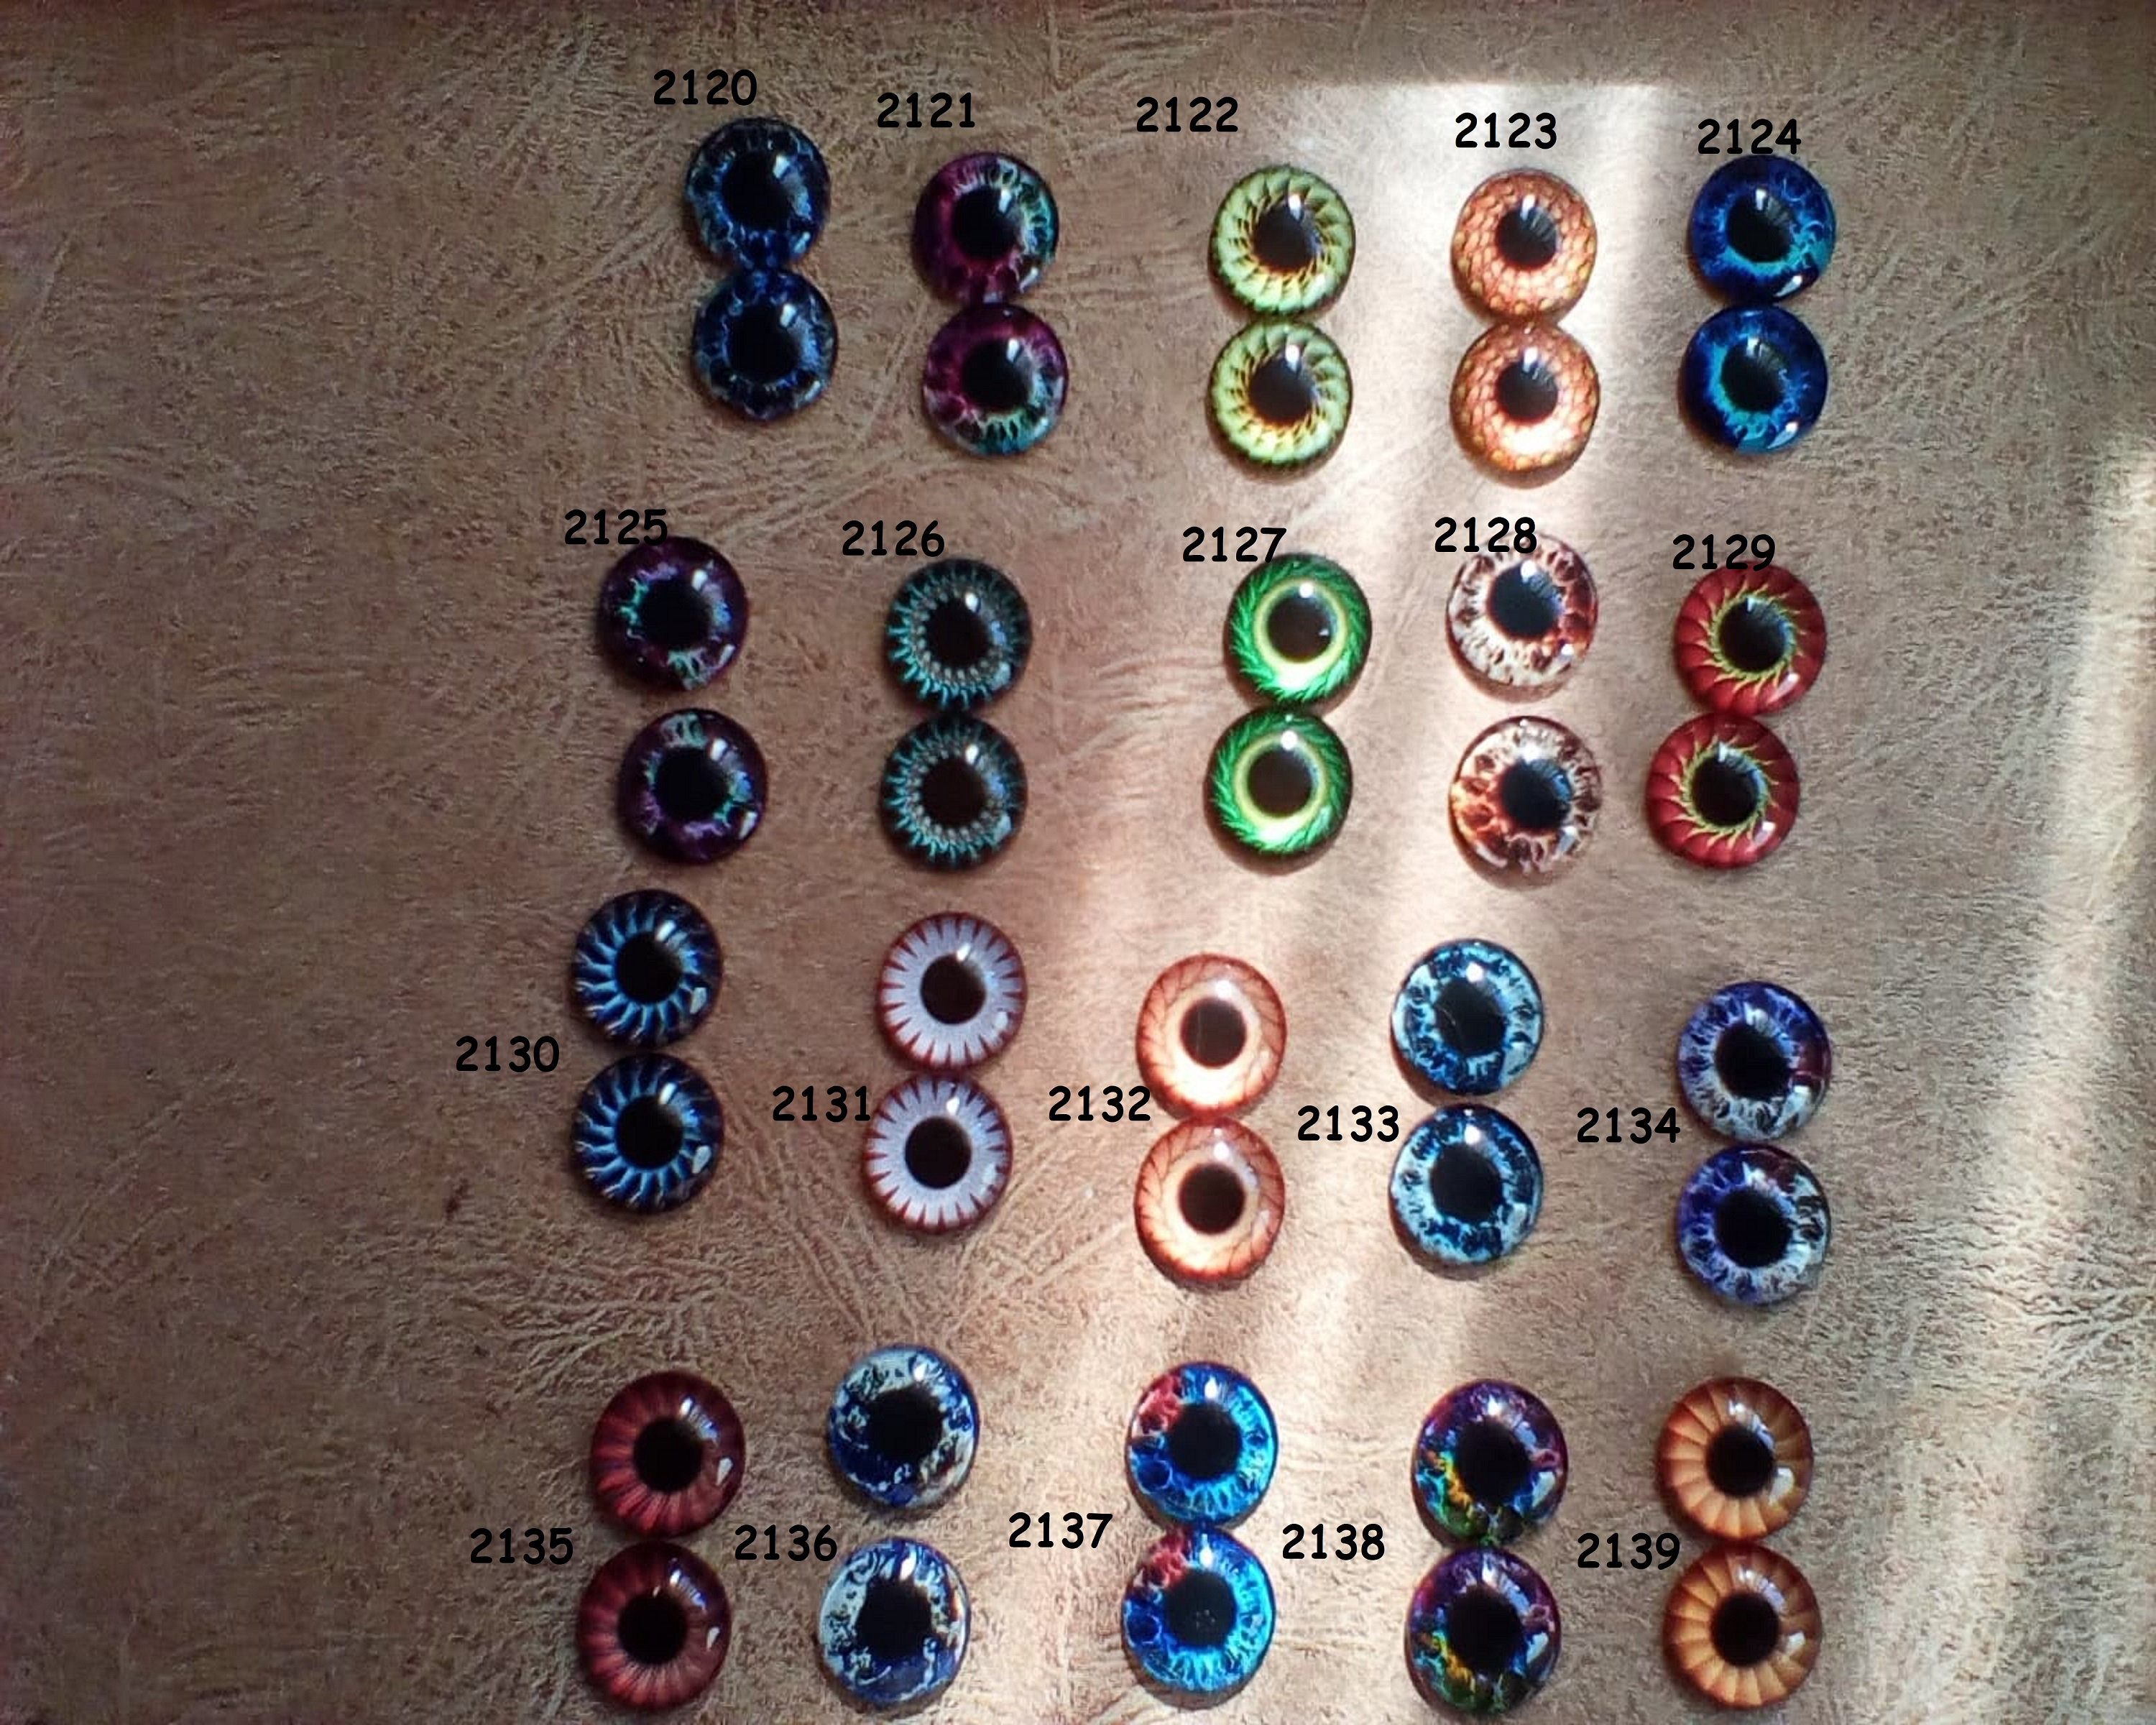 Sassy Bears 4.5mm Safety Eyes for bears, dolls, crafts (10 pairs) CHOOSE  COLOR